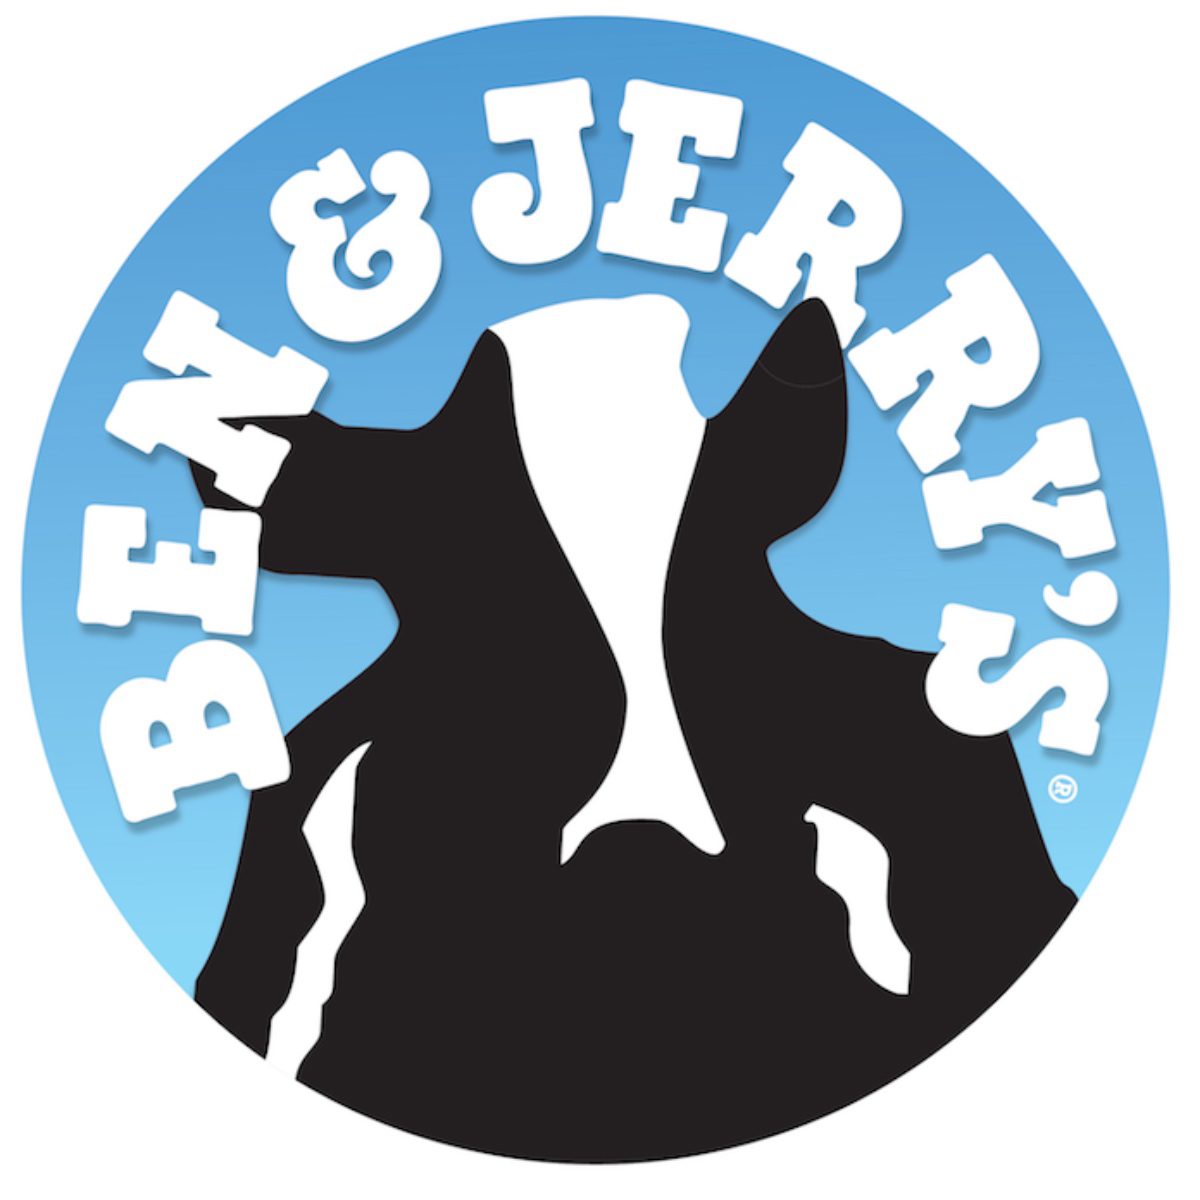 <p><strong><a class="SWhtmlLink" href="https://www.benjerry.com" rel="noopener">Ben & Jerry's</a>, Burlington</strong></p> <p>When a couple of childhood friends teamed up to start Ben & Jerry's, they sold everything from crepes to soup. Over the years, they scaled back and focused on what they're really good at—<a class="SWhtmlLink" href="https://www.tasteofhome.com/article/retired-ben-and-jerrys-flavors/" rel="noopener">ice cream with fun and funky flavors</a>.</p>